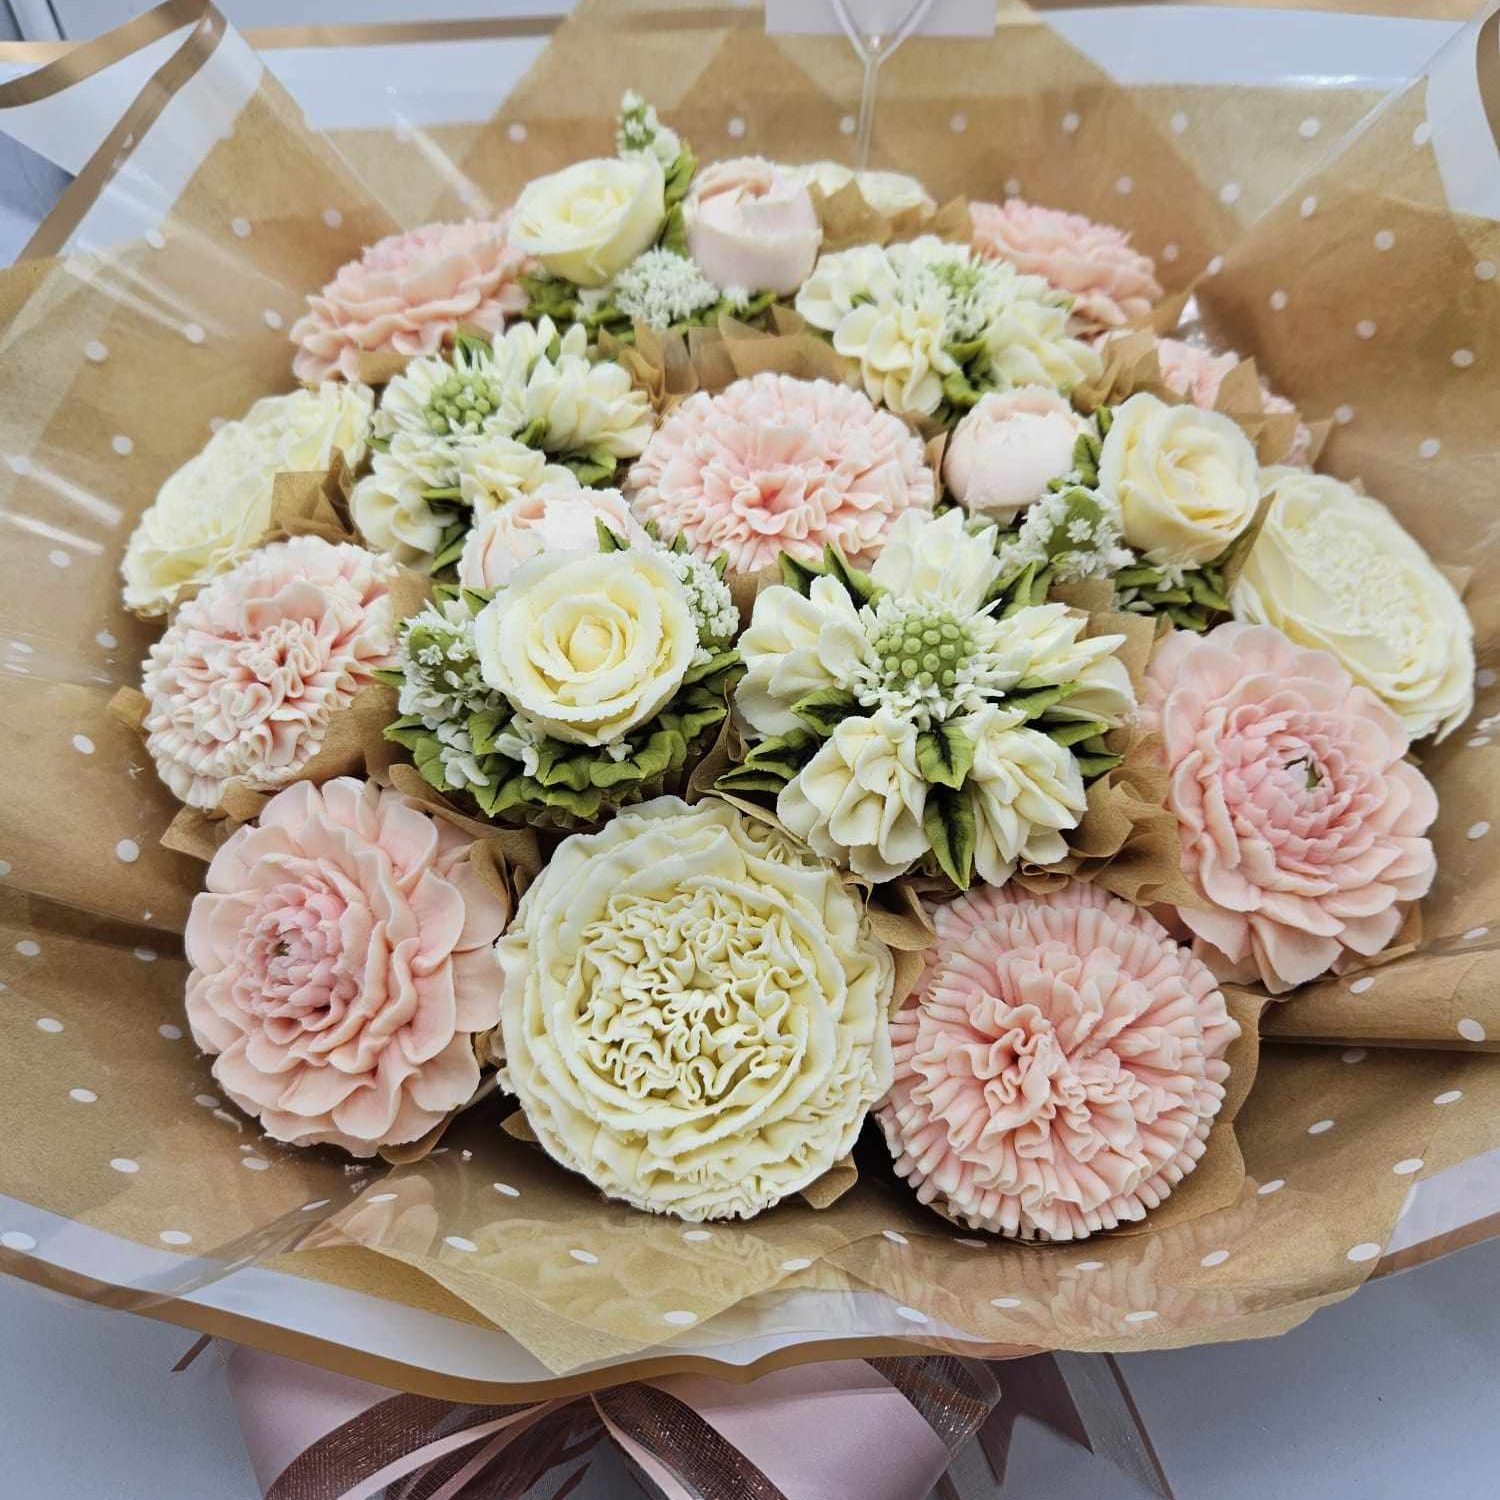 Luxury bouquet of hand piped flower cup cakes.